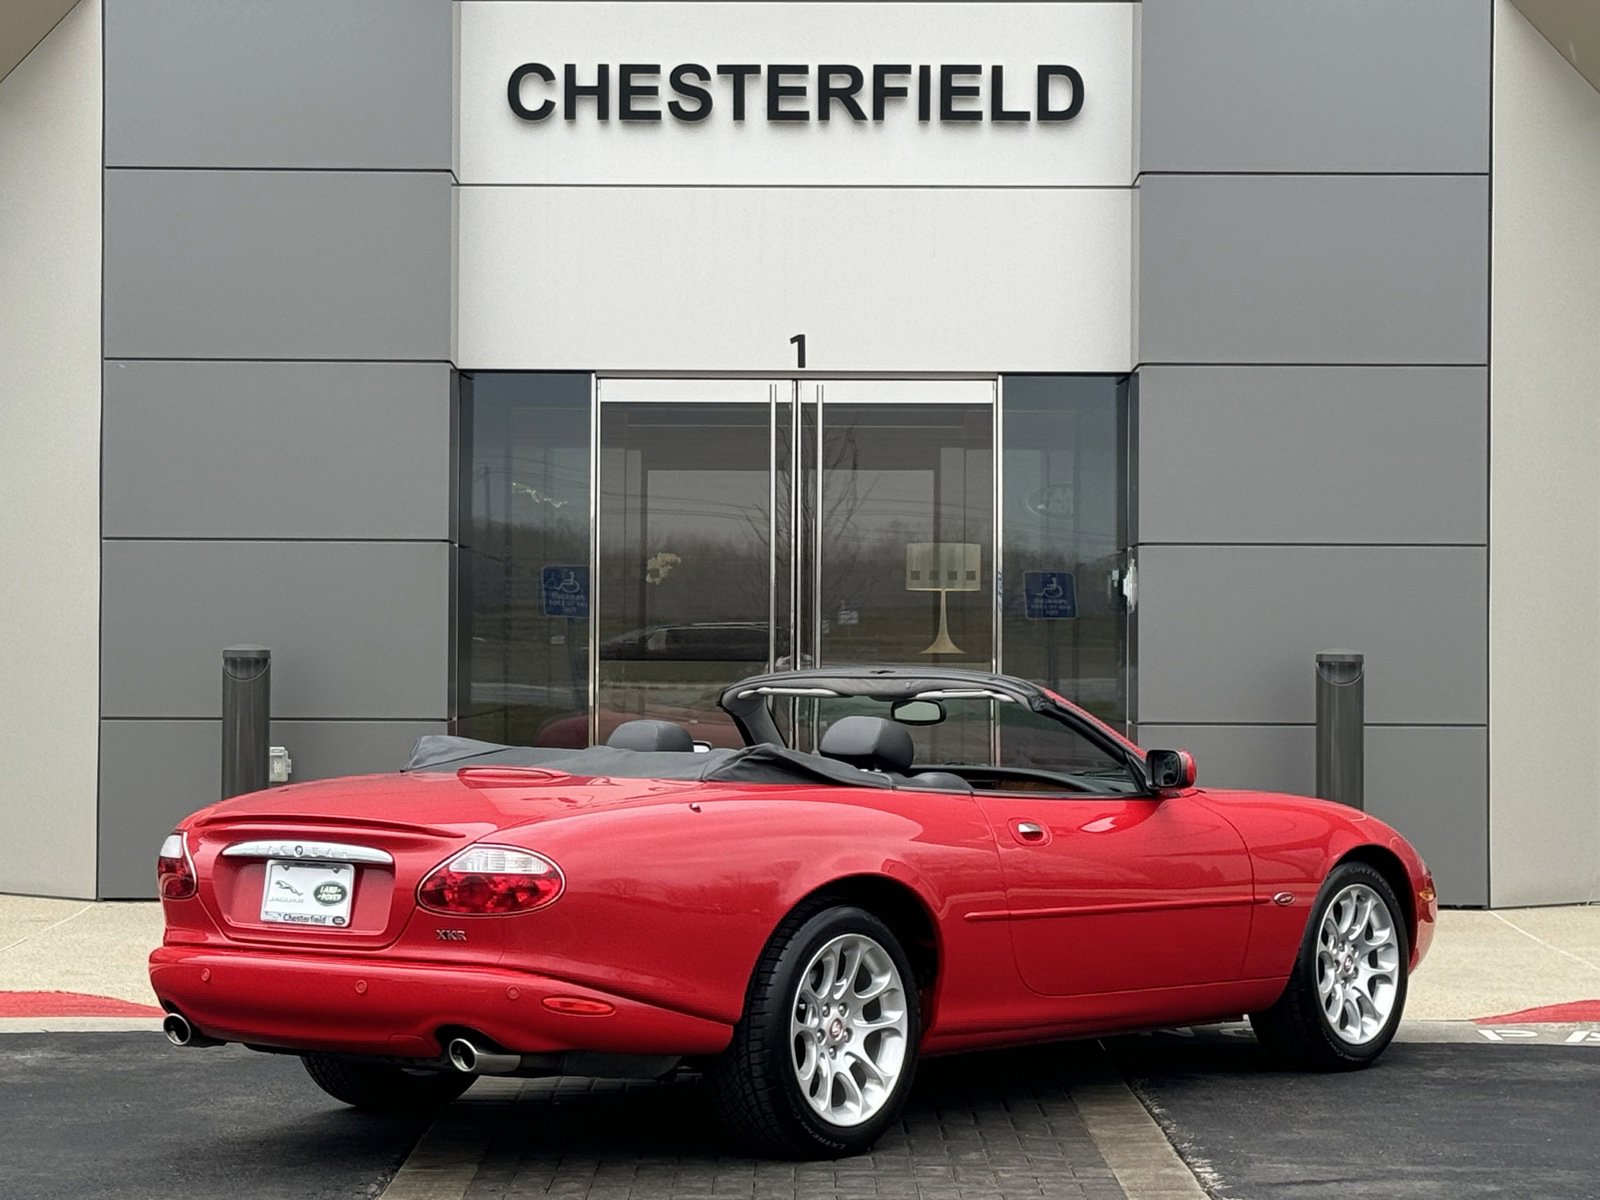 Used 2001 Jaguar XK Series XKR Convertible with VIN SAJDA42B51PA16549 for sale in Chesterfield, MO